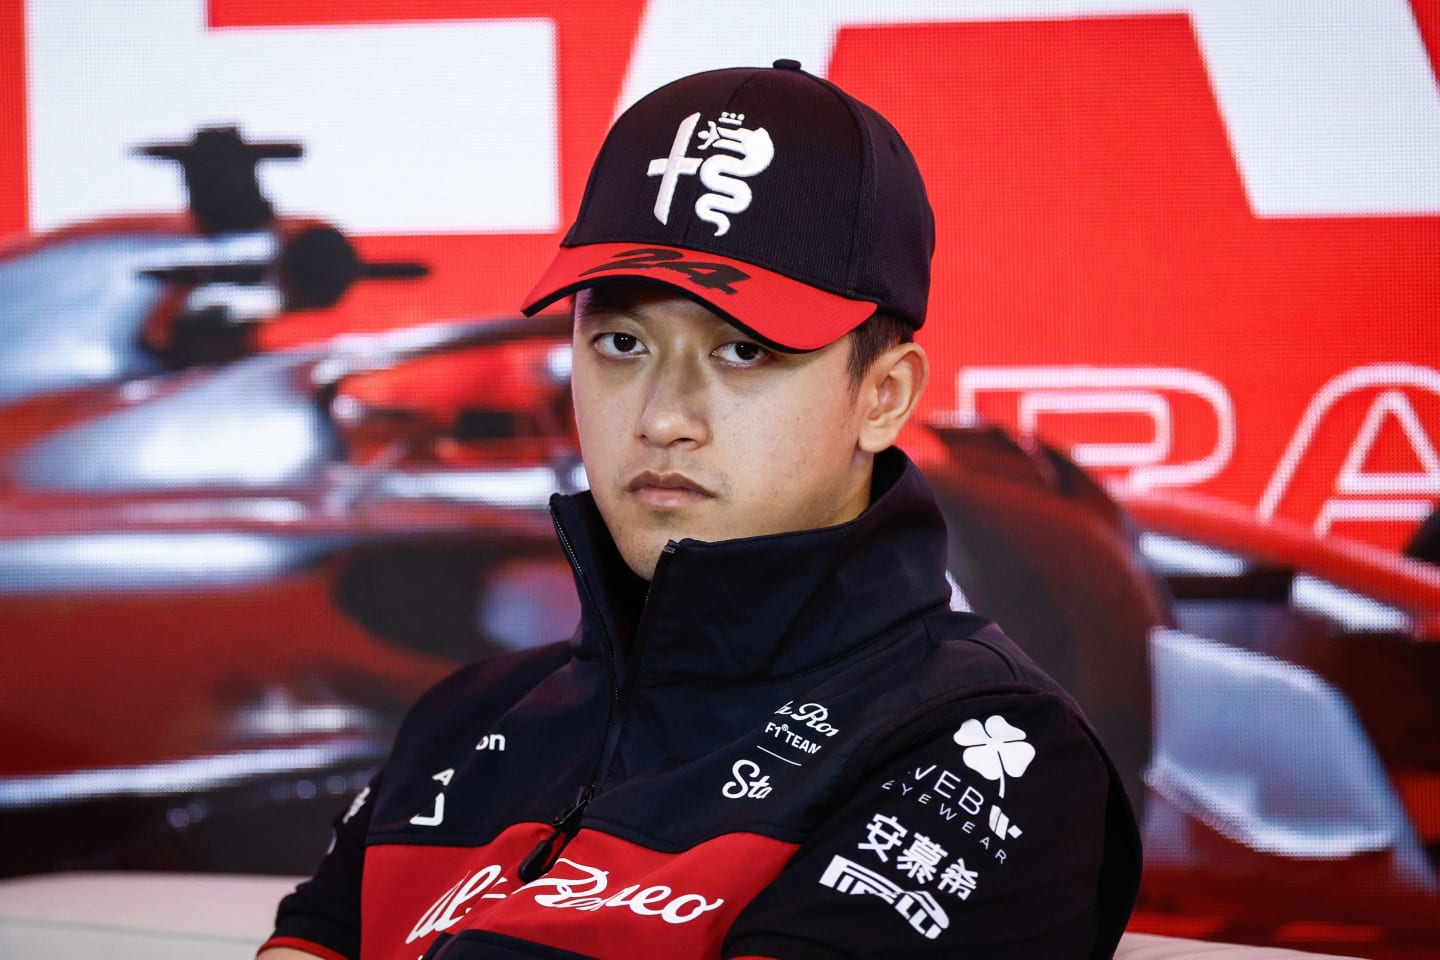 Alfa Romeo's Chinese driver Zhou Guanyu looks on during a press conference ahead of the Dutch Formula One Grand Prix, in the coastal town of Zandvoort on August 24, 2023. The 2023 Dutch Grand Prix will take place on August 27, 2023. (Photo by Simon Wohlfahrt / AFP) (Photo by SIMON WOHLFAHRT/AFP via Getty Images)